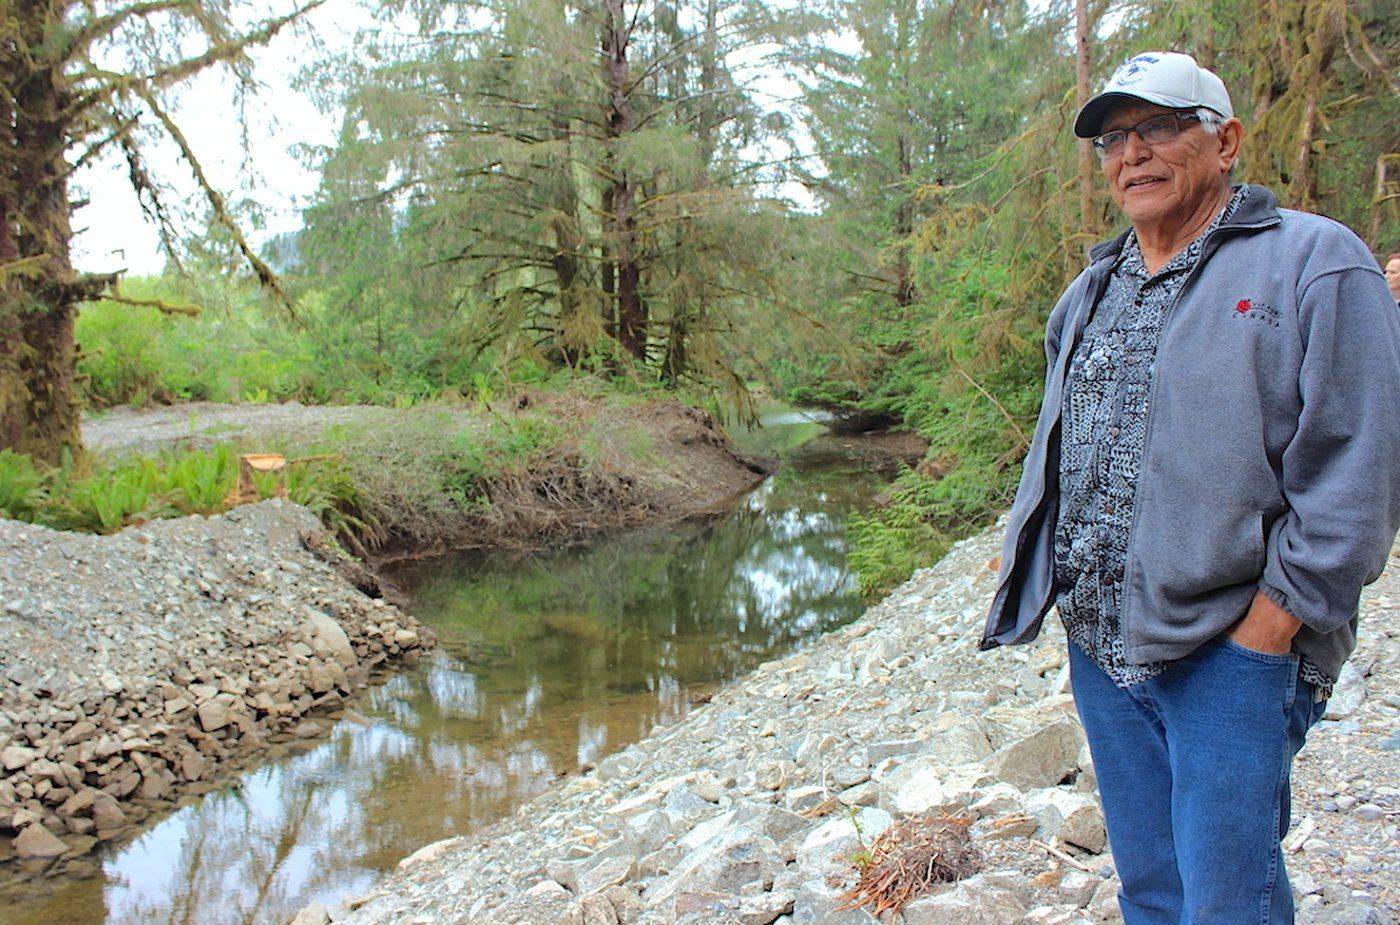 By protesting uninvited in First Nations’ territories, conservationists are acting in a neocolonial or paternalistic manner, says Huu-ay-aht Chief Robert Dennis. Photo by Heather Thomson